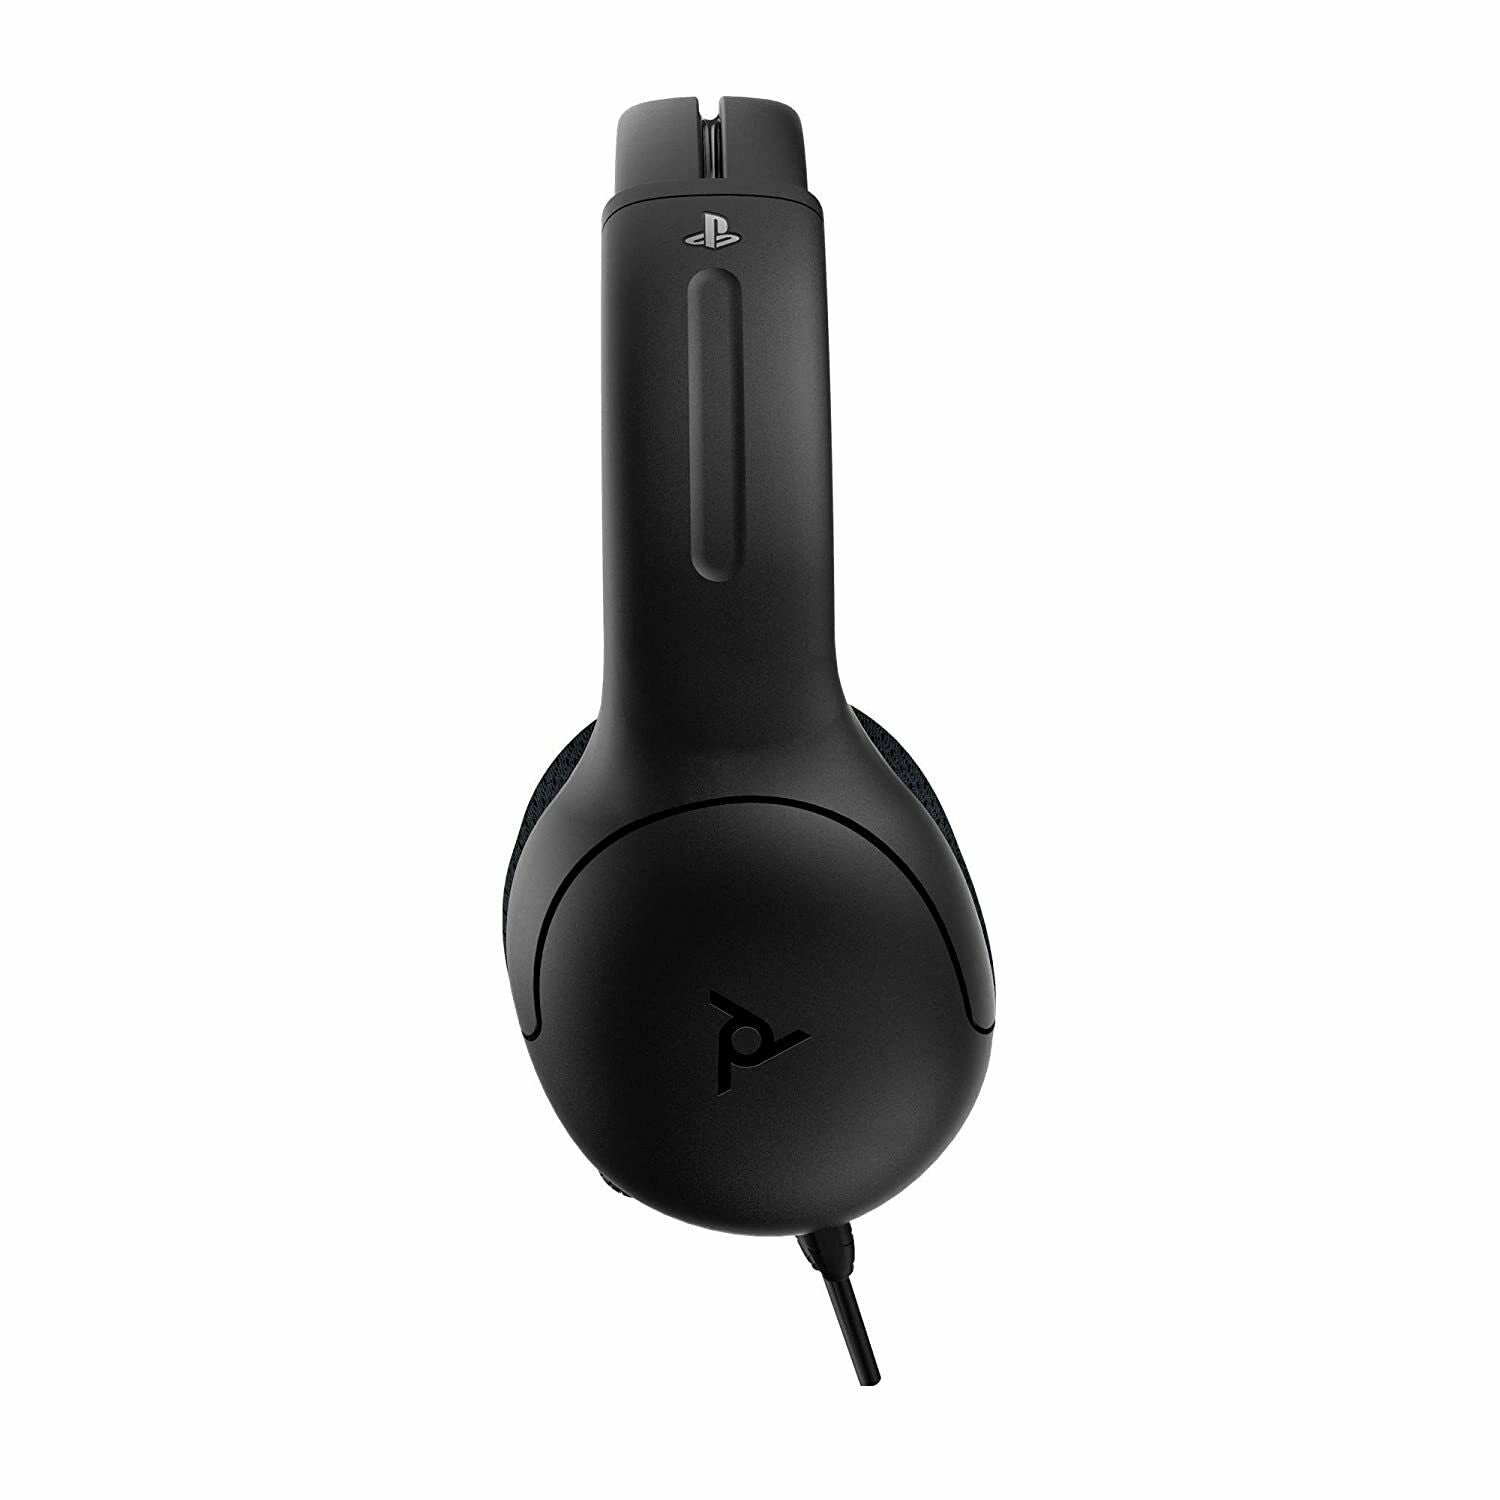 PDP LVL40 Wired Stereo Gaming Headset, PS4, On Sale Now